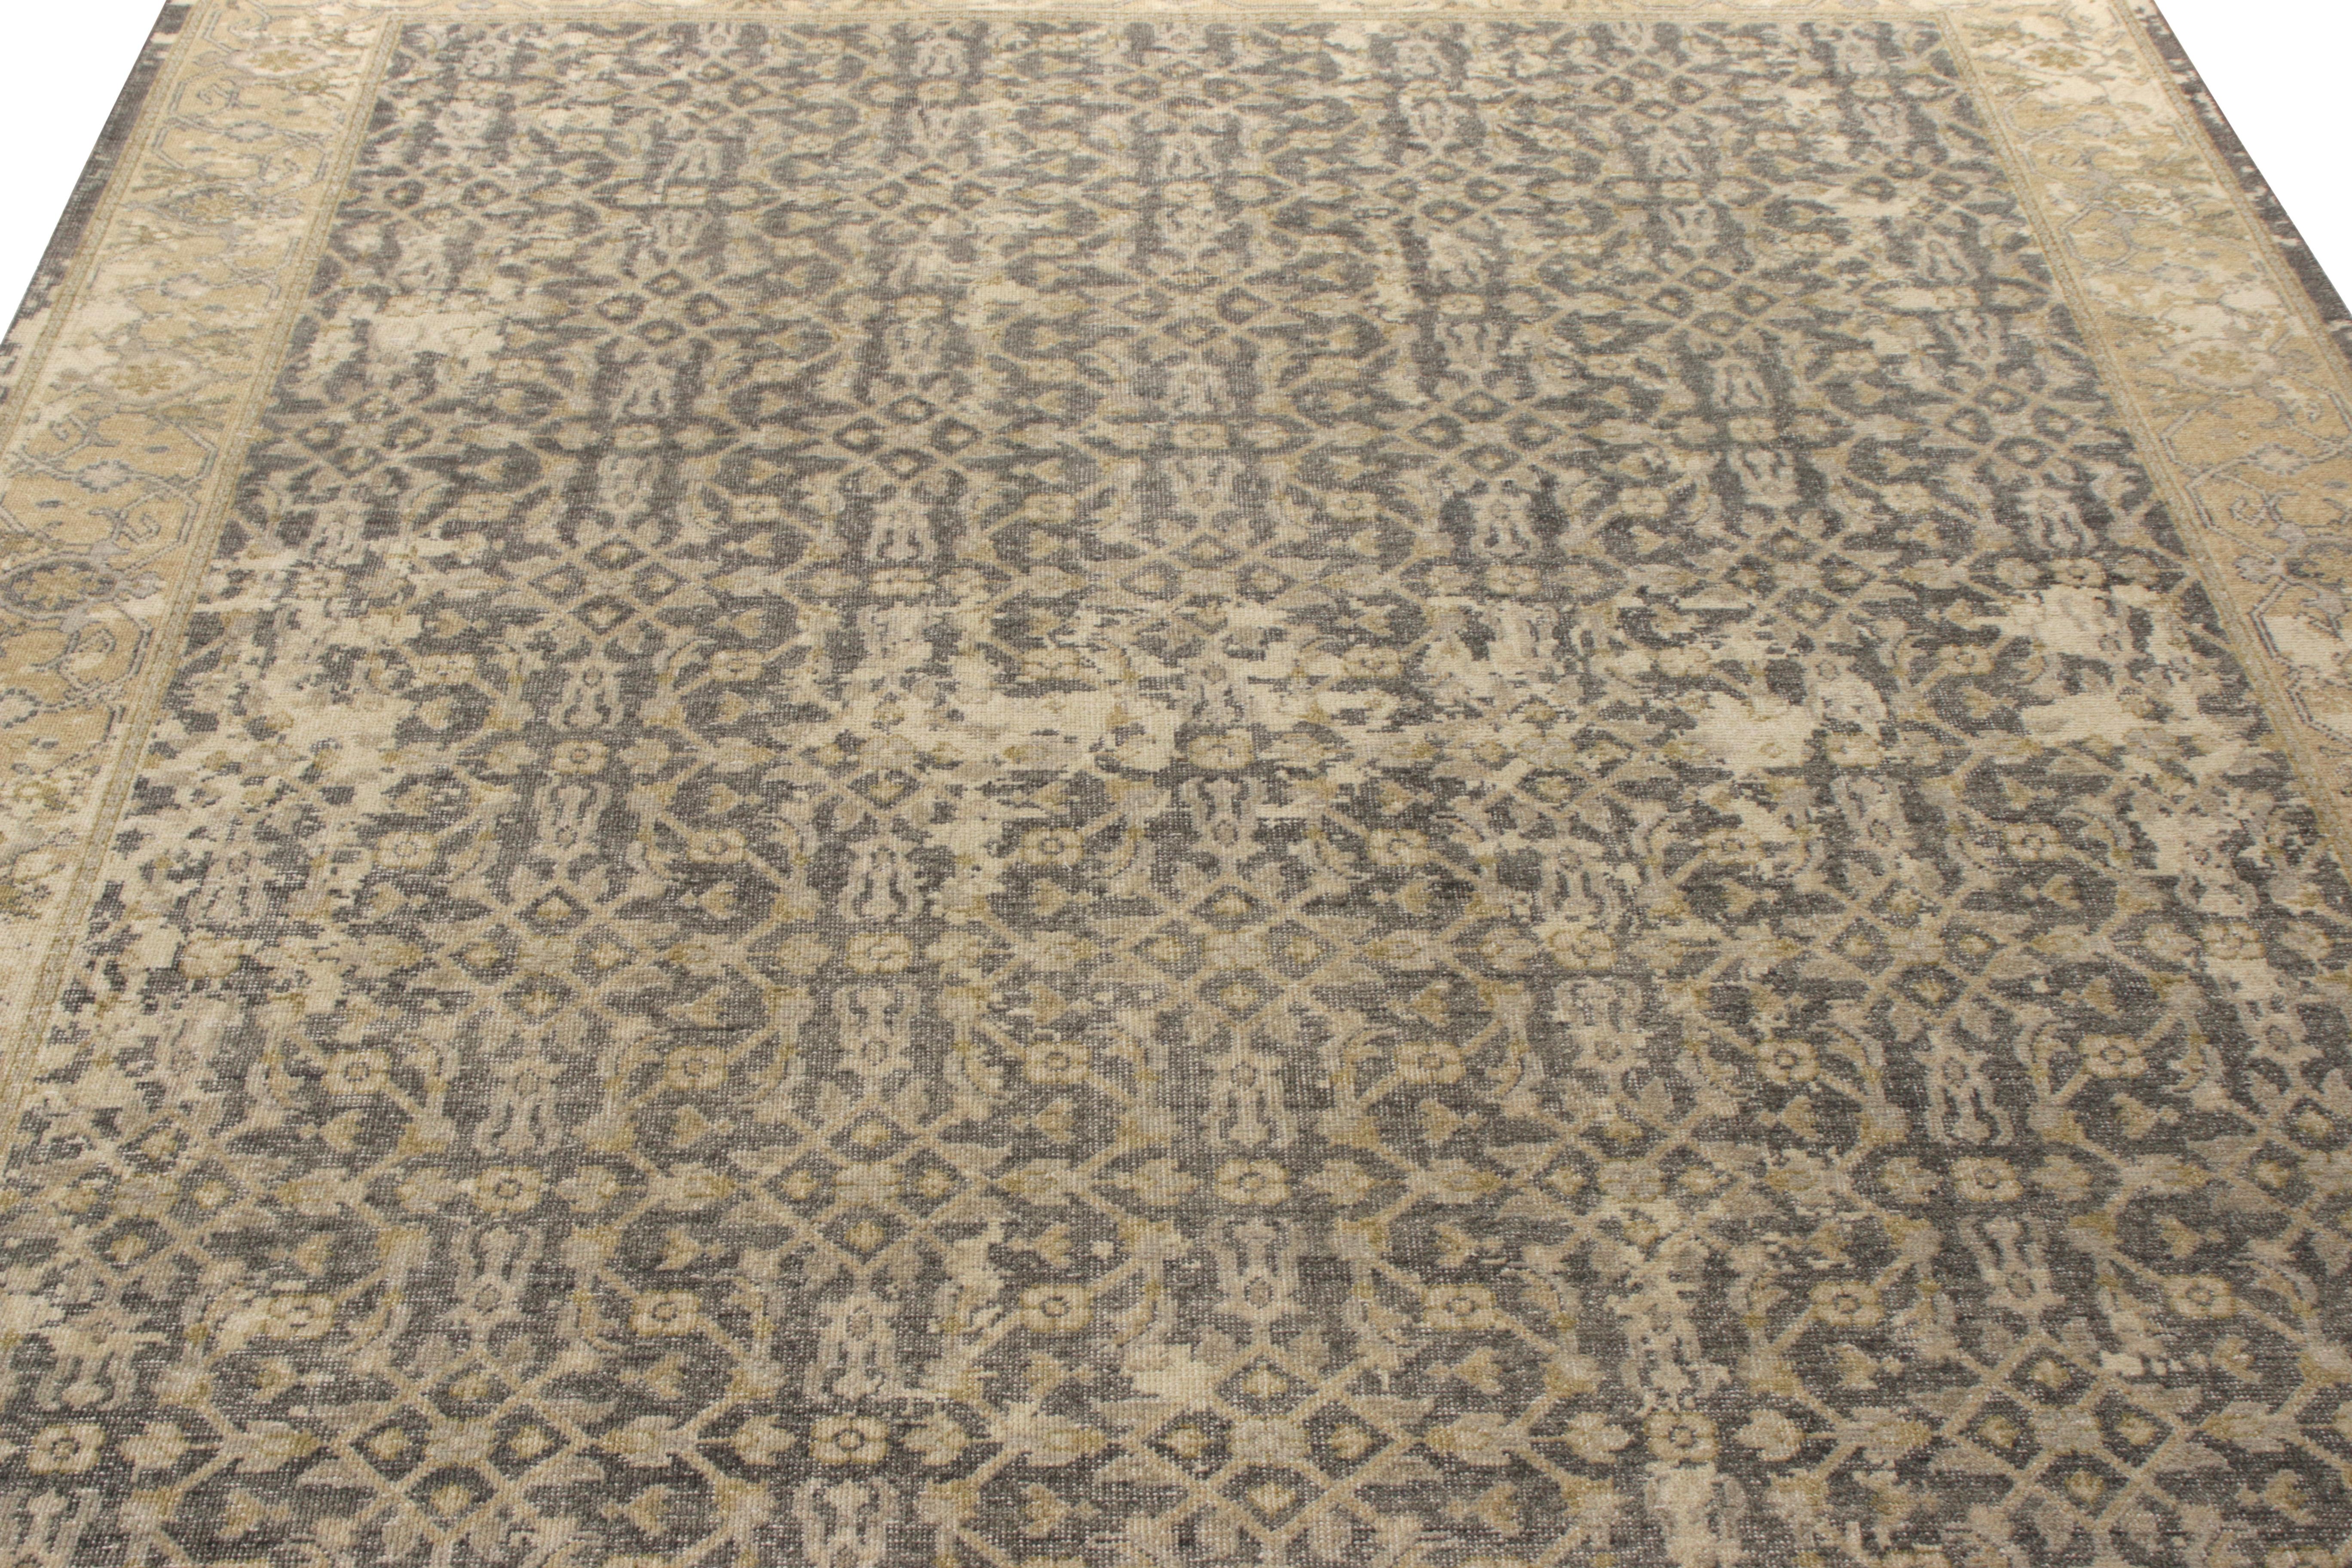 Hand knotted in fine quality yarn, Rug & Kilim presents a unique take in Distressed style from its exclusive Homage collection. Flourishing on a magnificent 9 X 12 scale in this edition, this custom rug design marks a shabby chic tone with touches